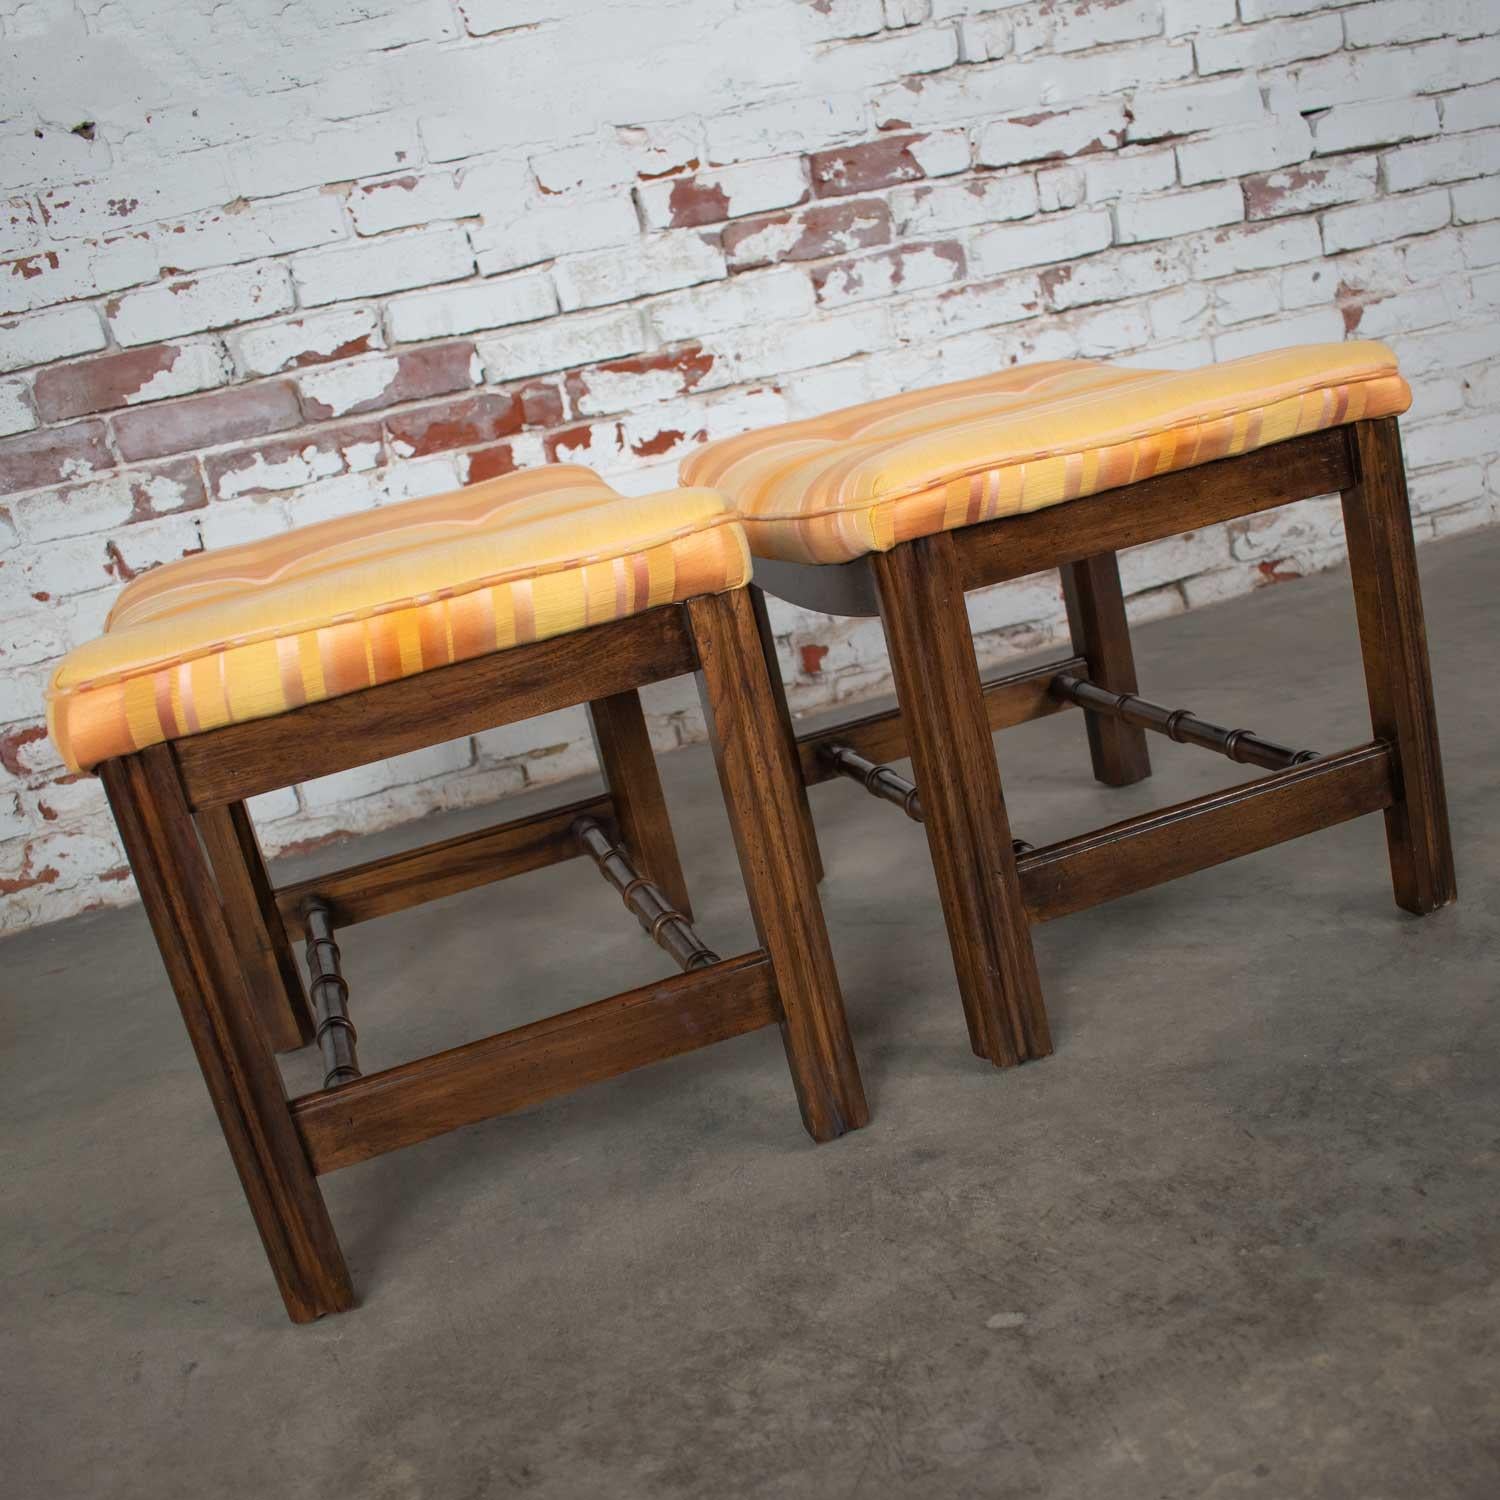 20th Century Chinese Chippendale Pair of Foot Stools in Orange and Yellow Stripe Upholstery